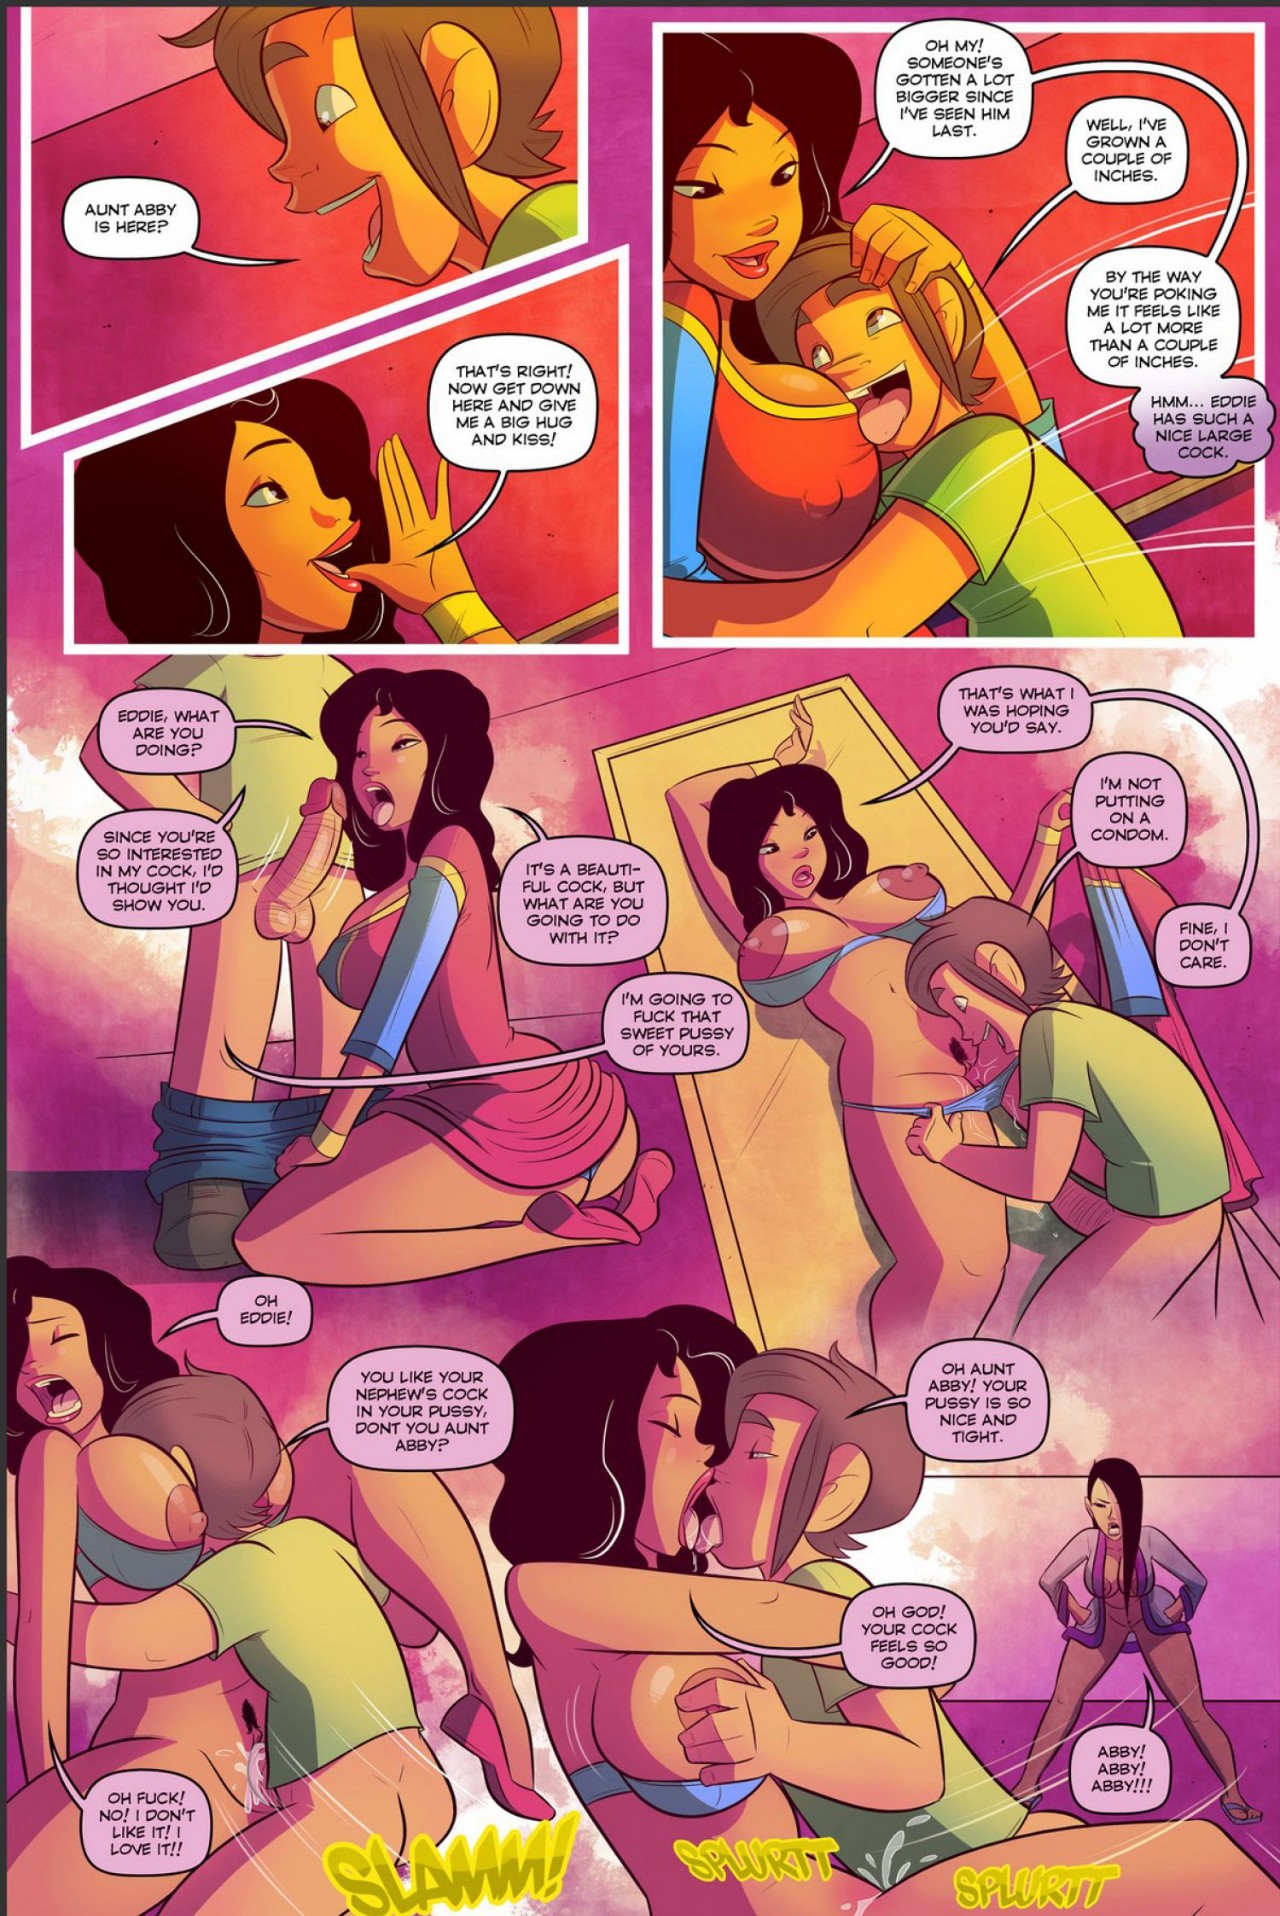 Keeping It Up With The Joneses Part 3 Porn Comic english 06